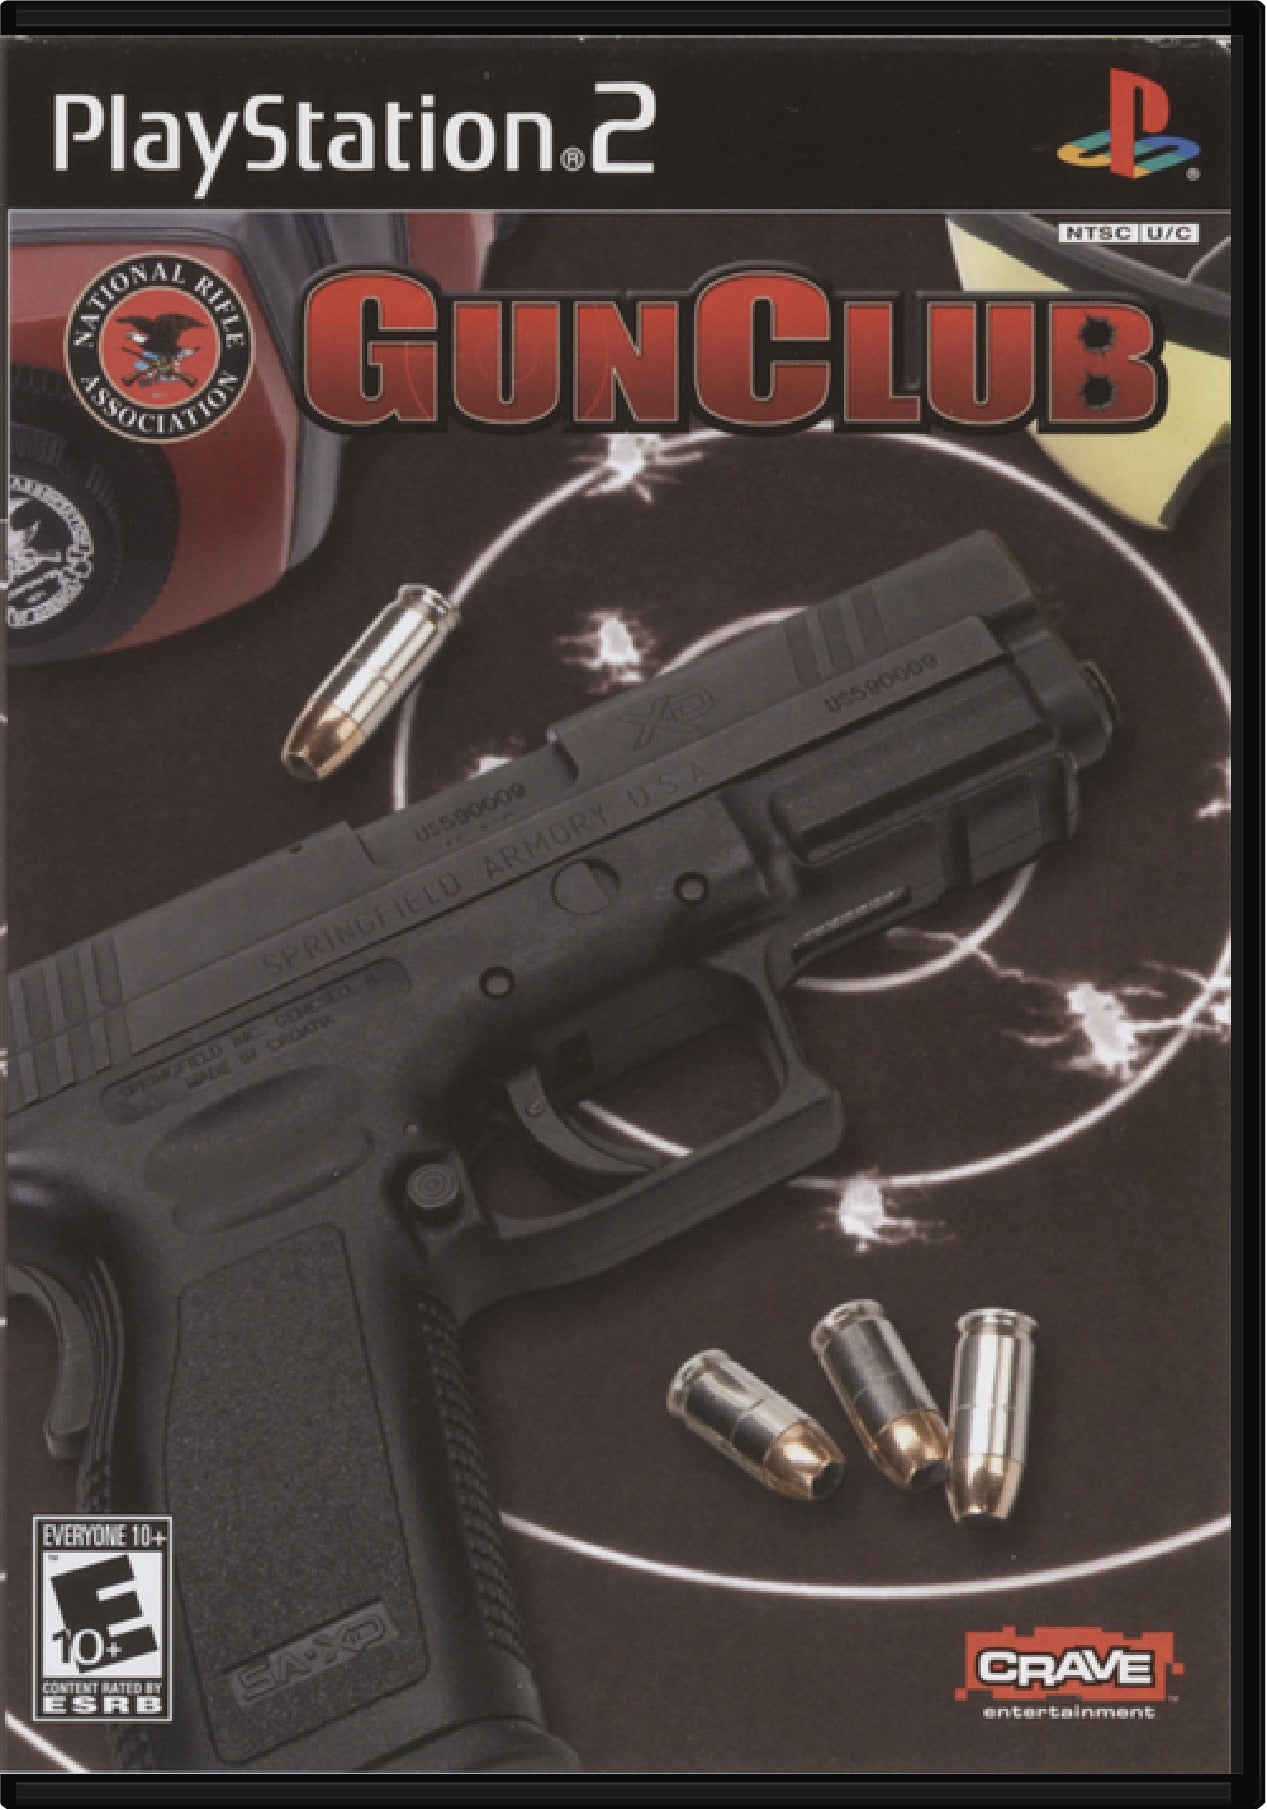 NRA Gun Club Cover Art and Product Photo